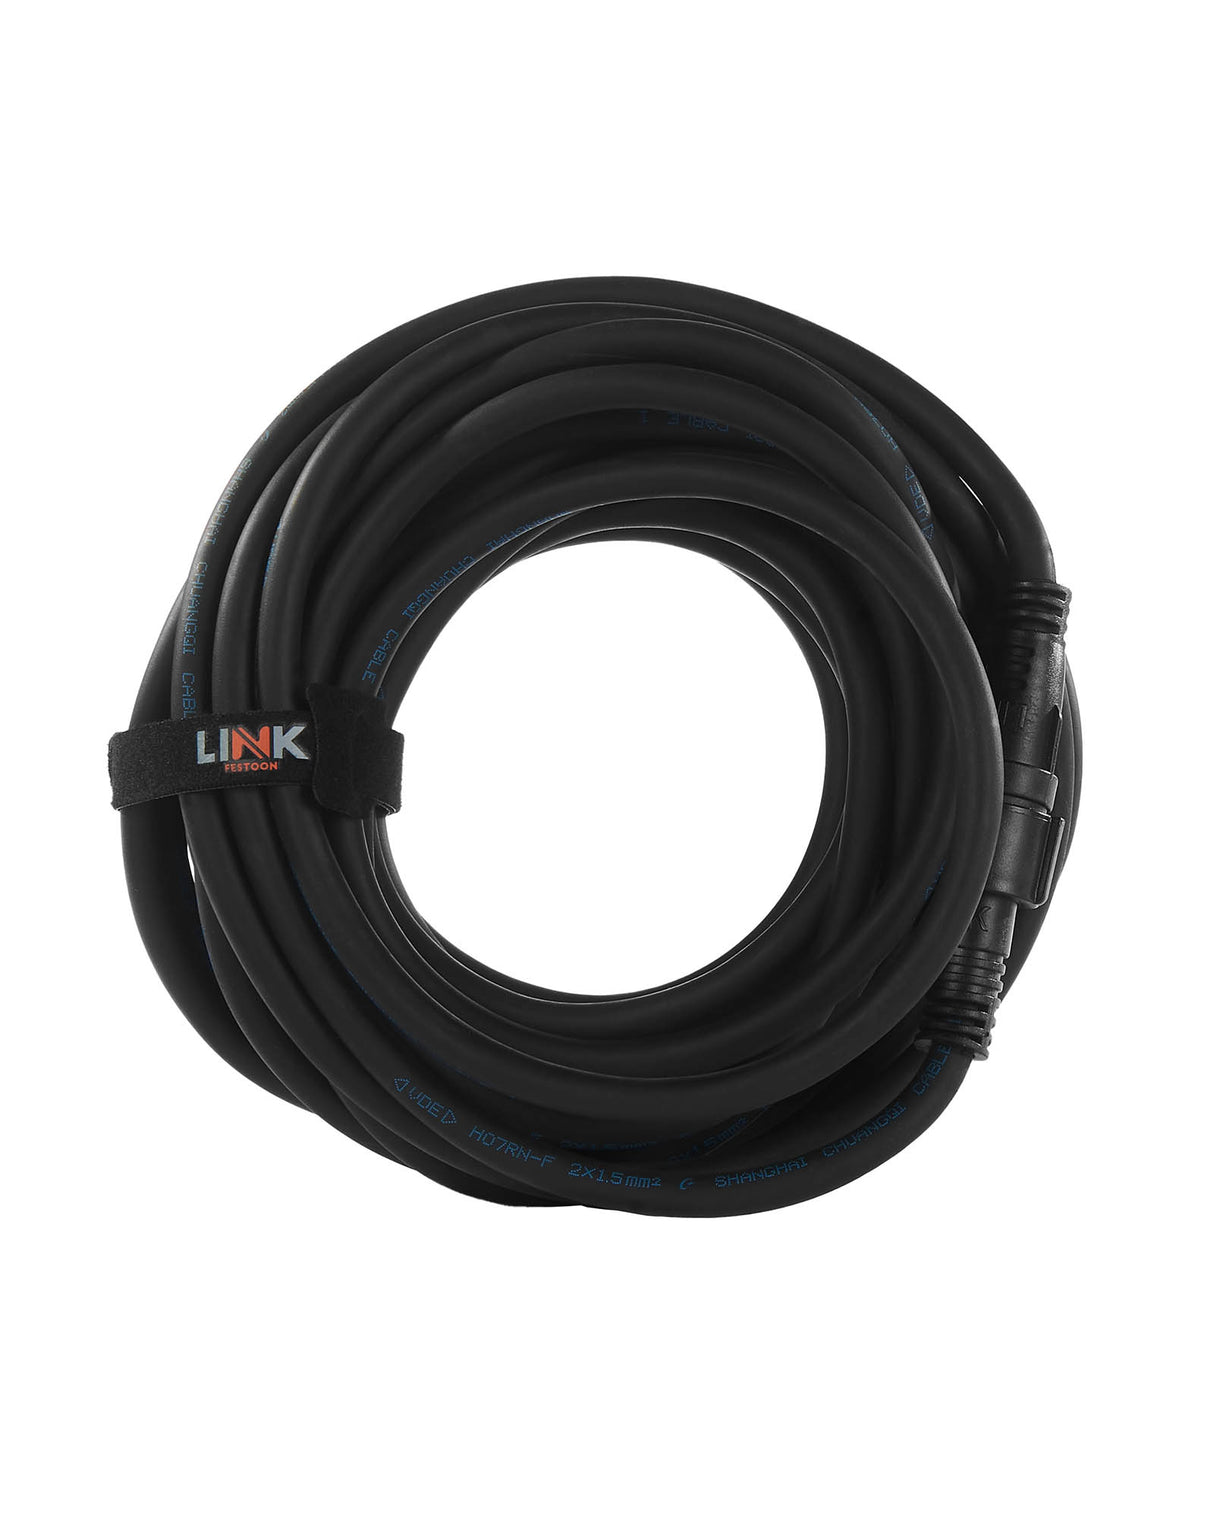 LINK FESTOON Extension Cable, Connectable, Black Cable